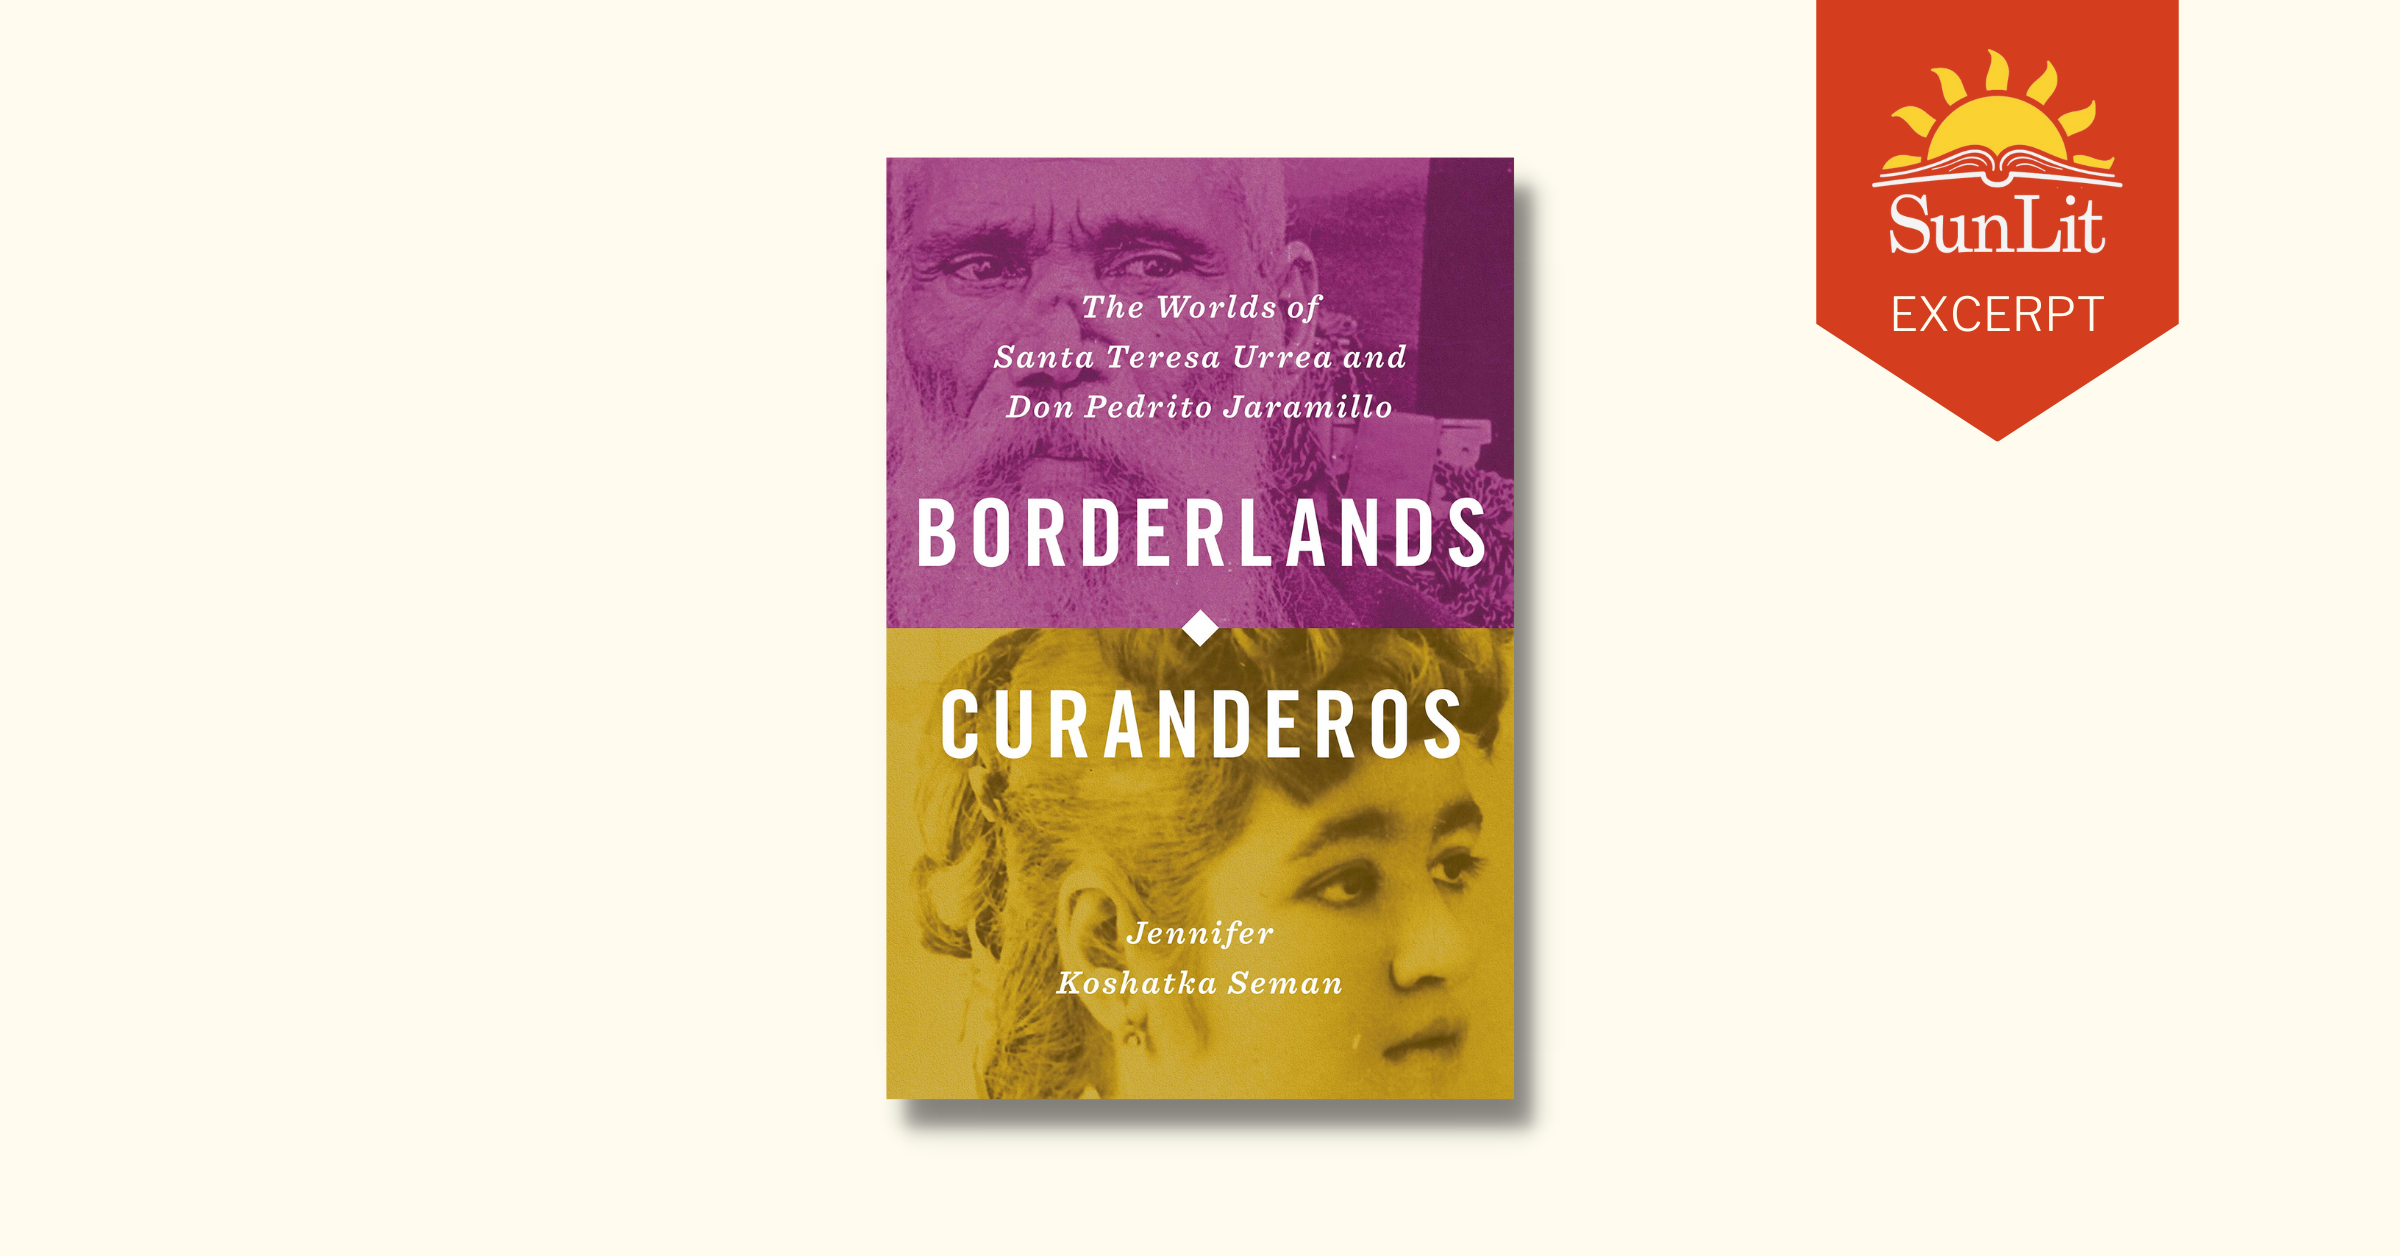  “Borderlands Curanderos” traces impact of two faith healers and revolutionaries 